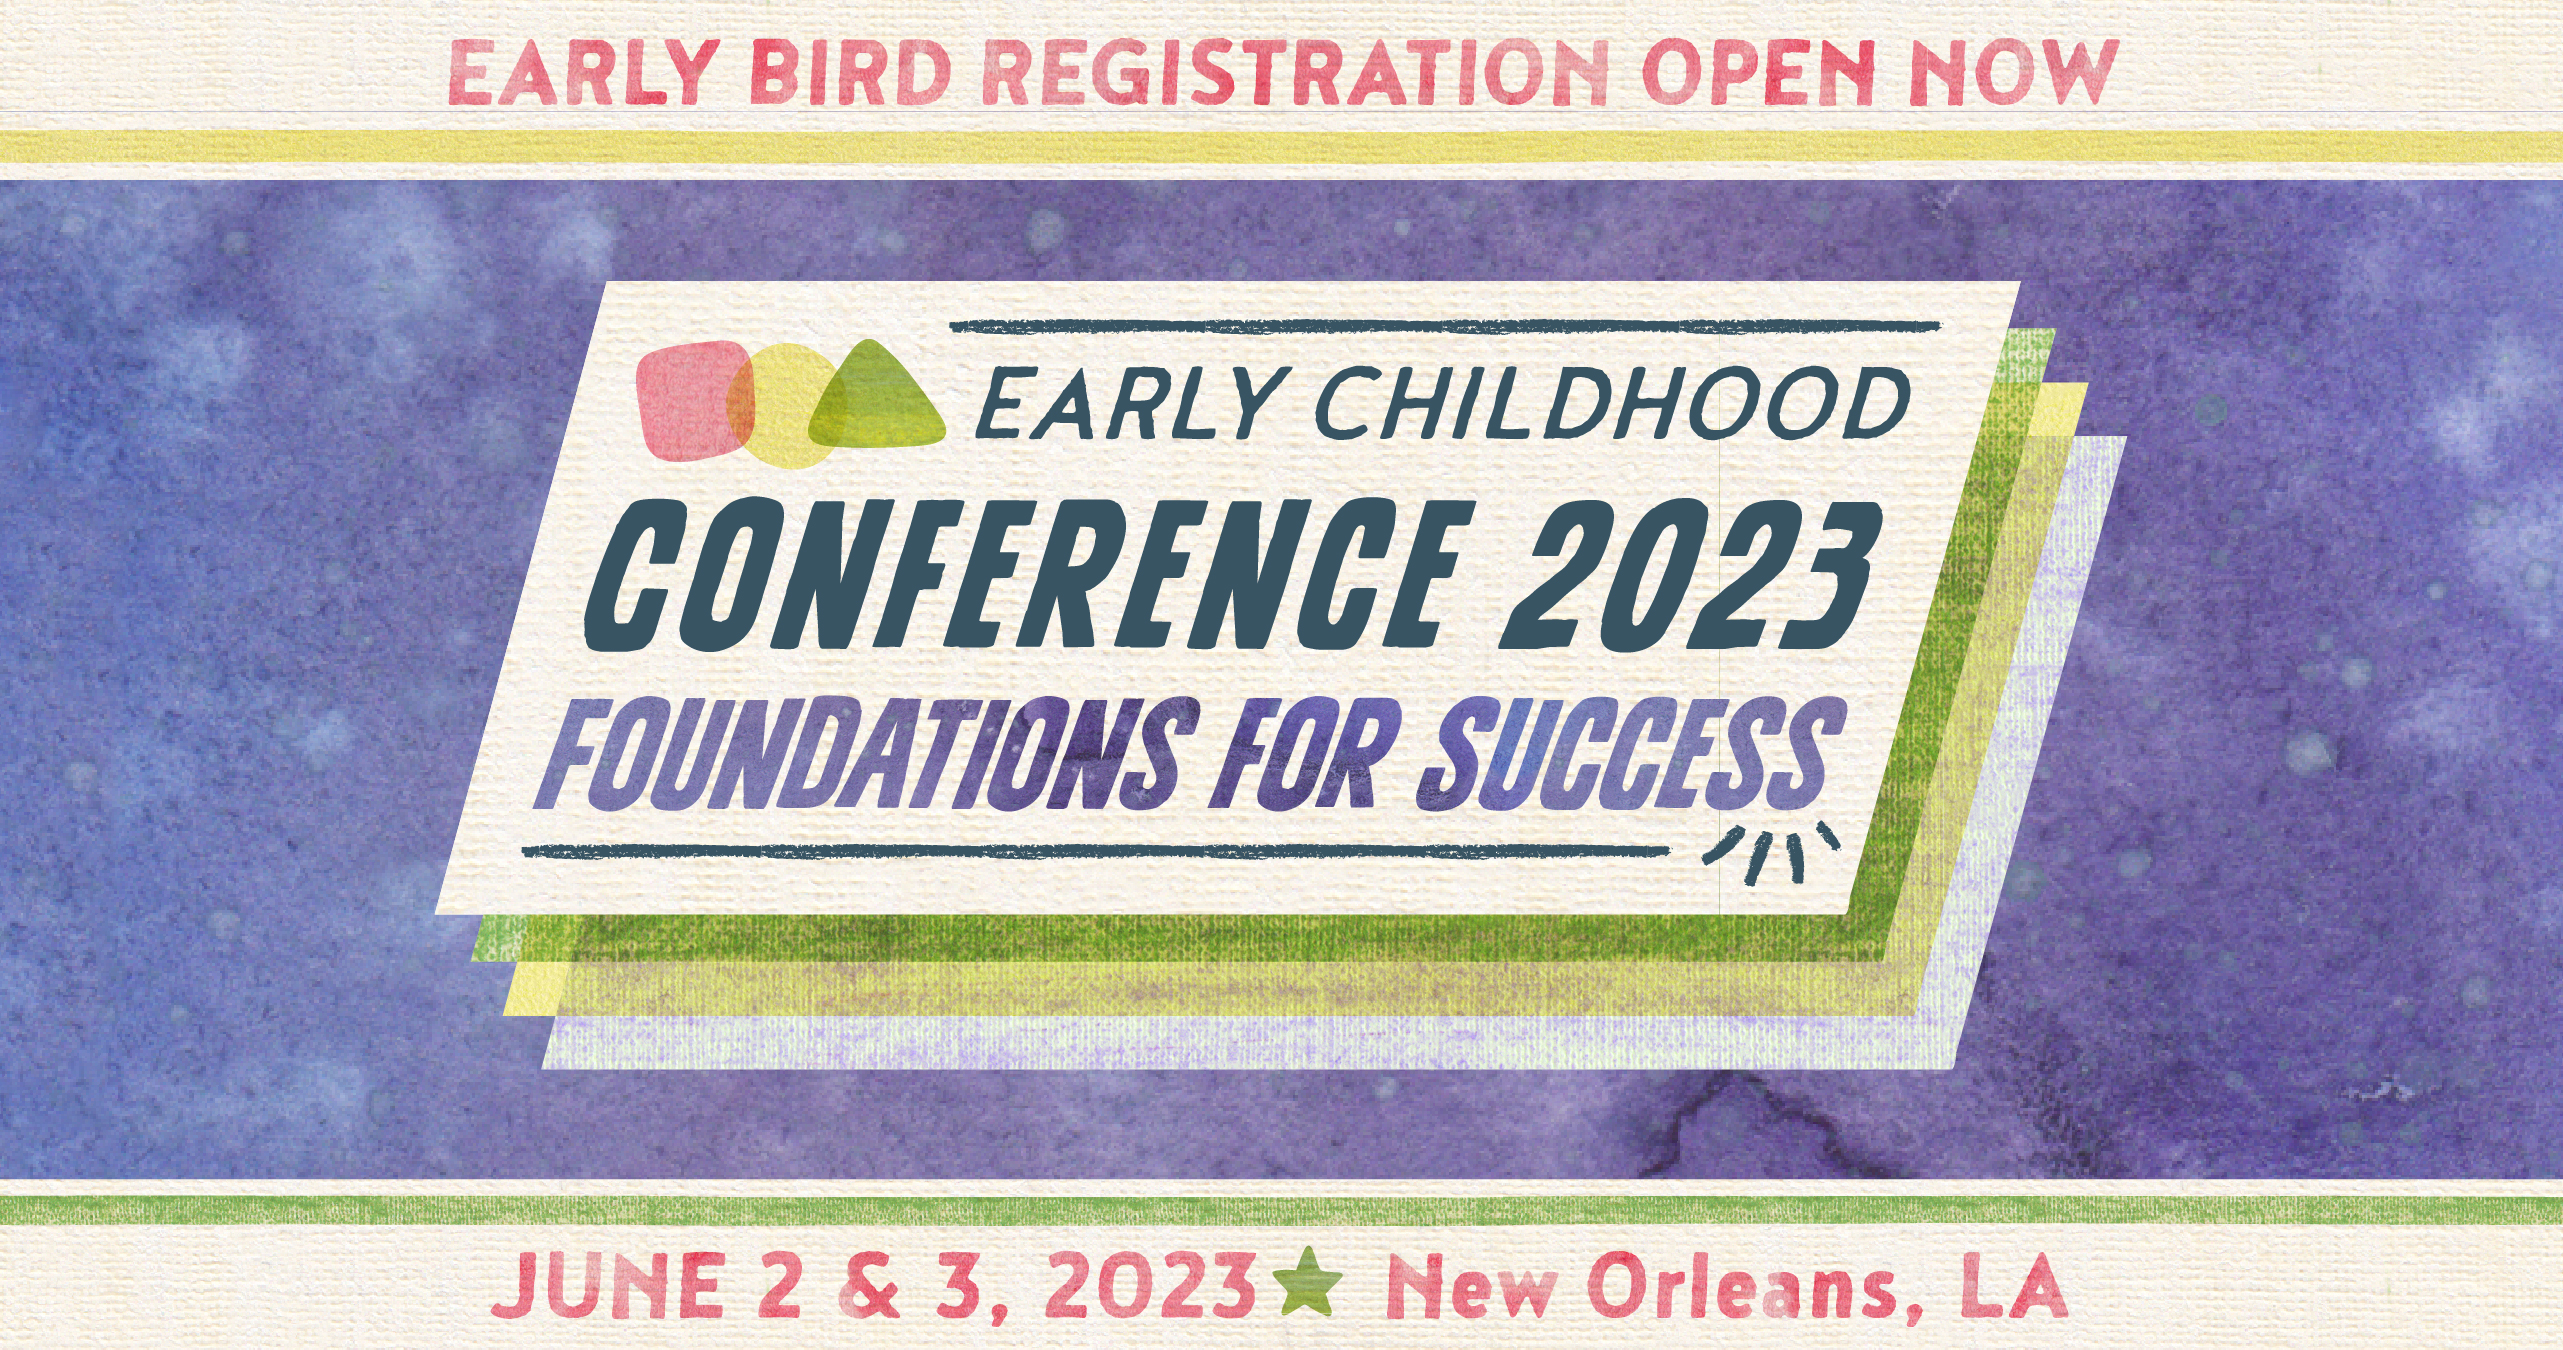 2023 Early Childhood Conference - Foundations for Success - July 2 & 3, 2023, New Orleans, La - Early Bird Registration Open Now!